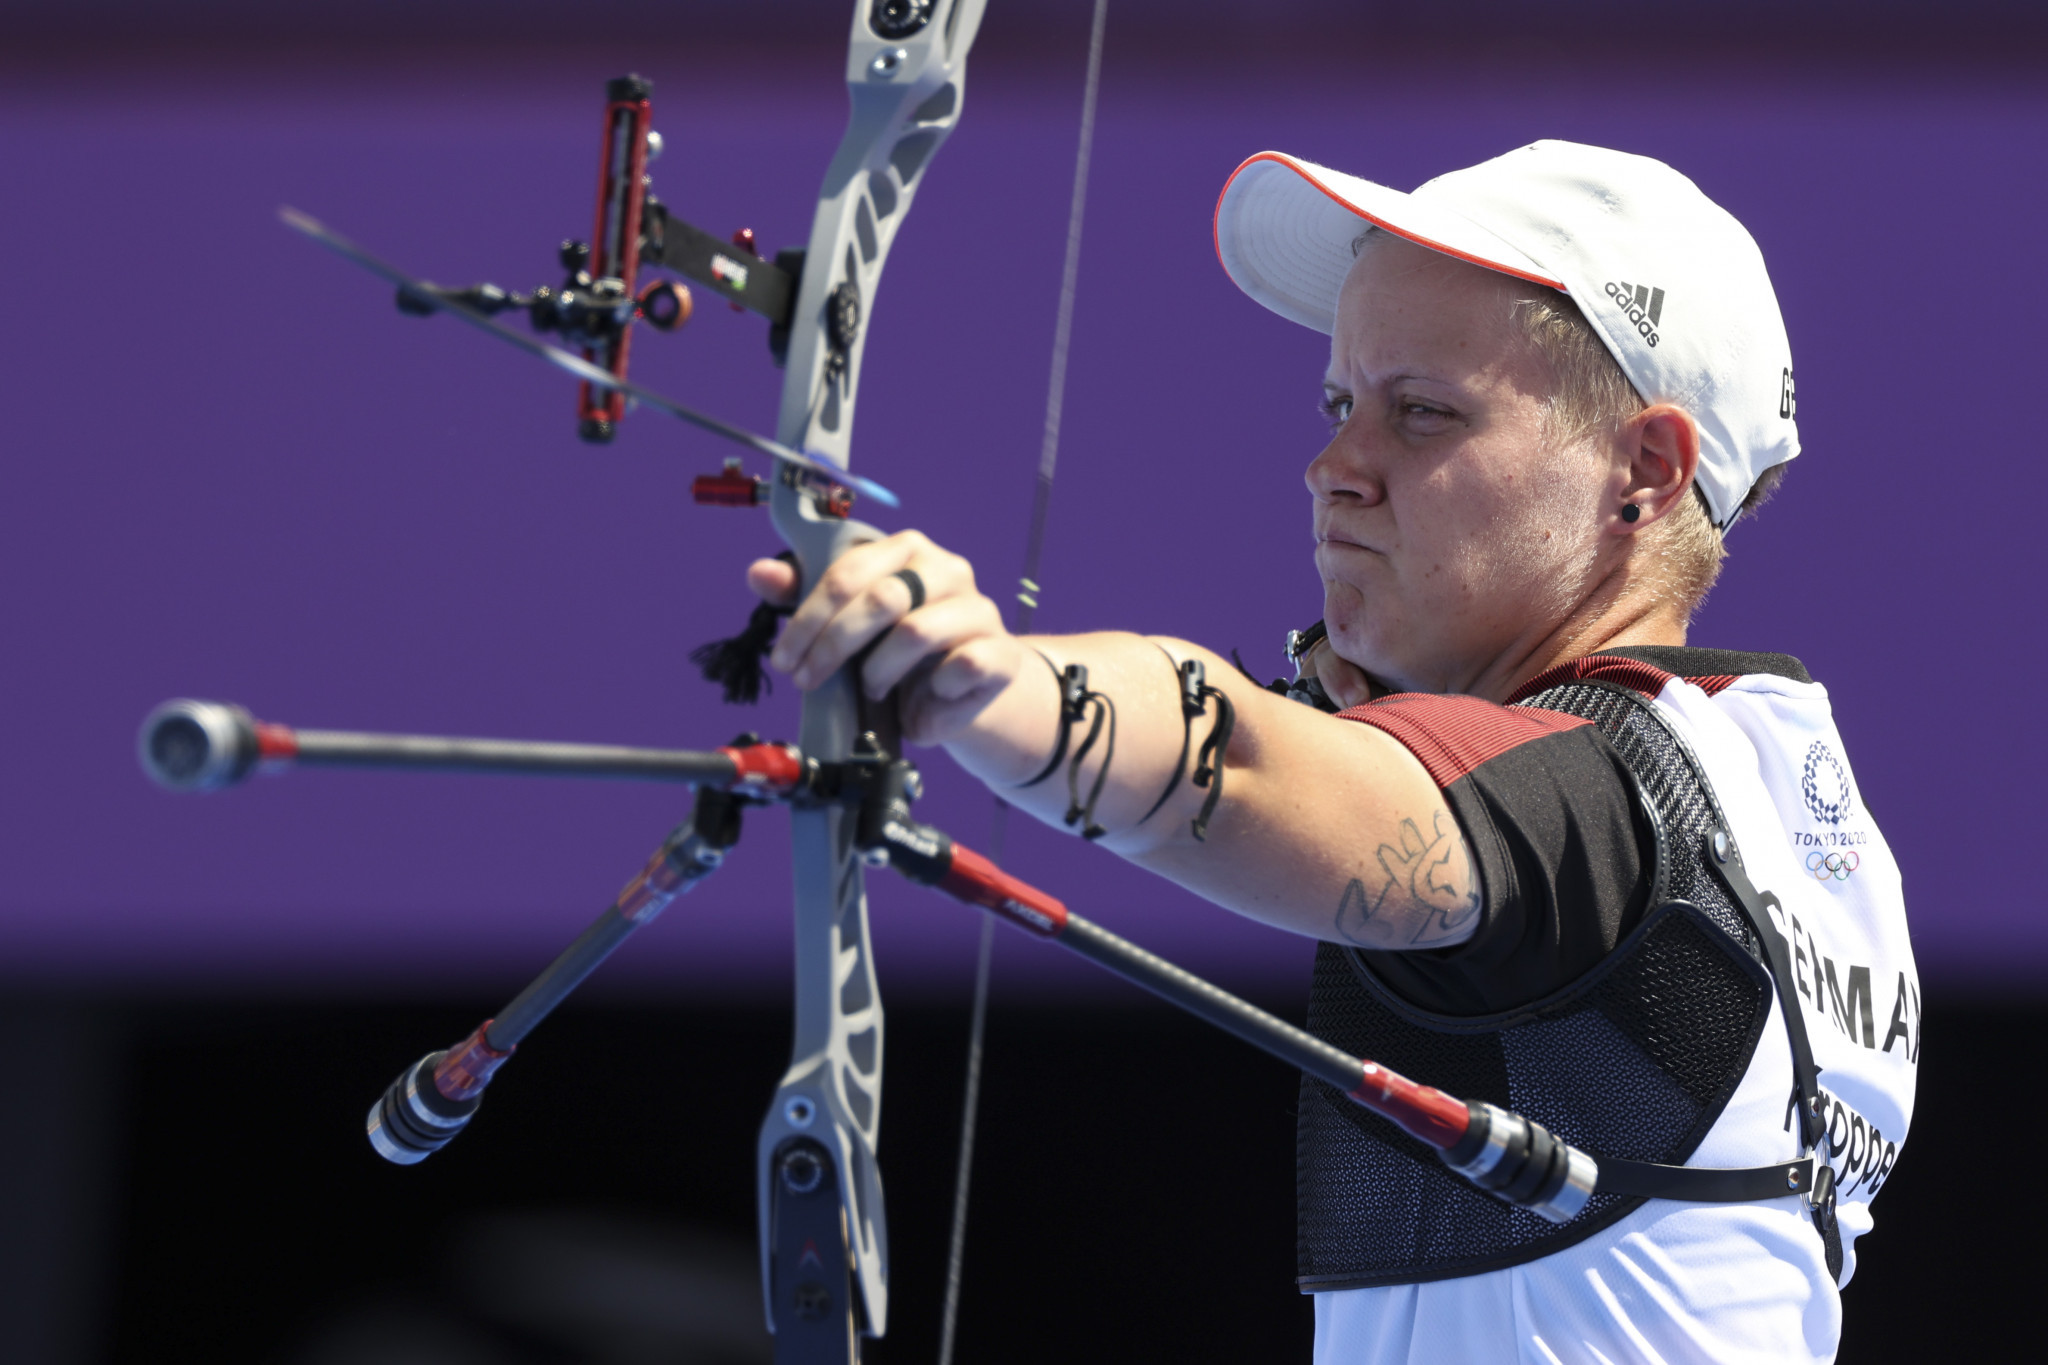 Michelle Kroppen claimed one gold and two silvers today at the European Archery Championships ©Getty Images